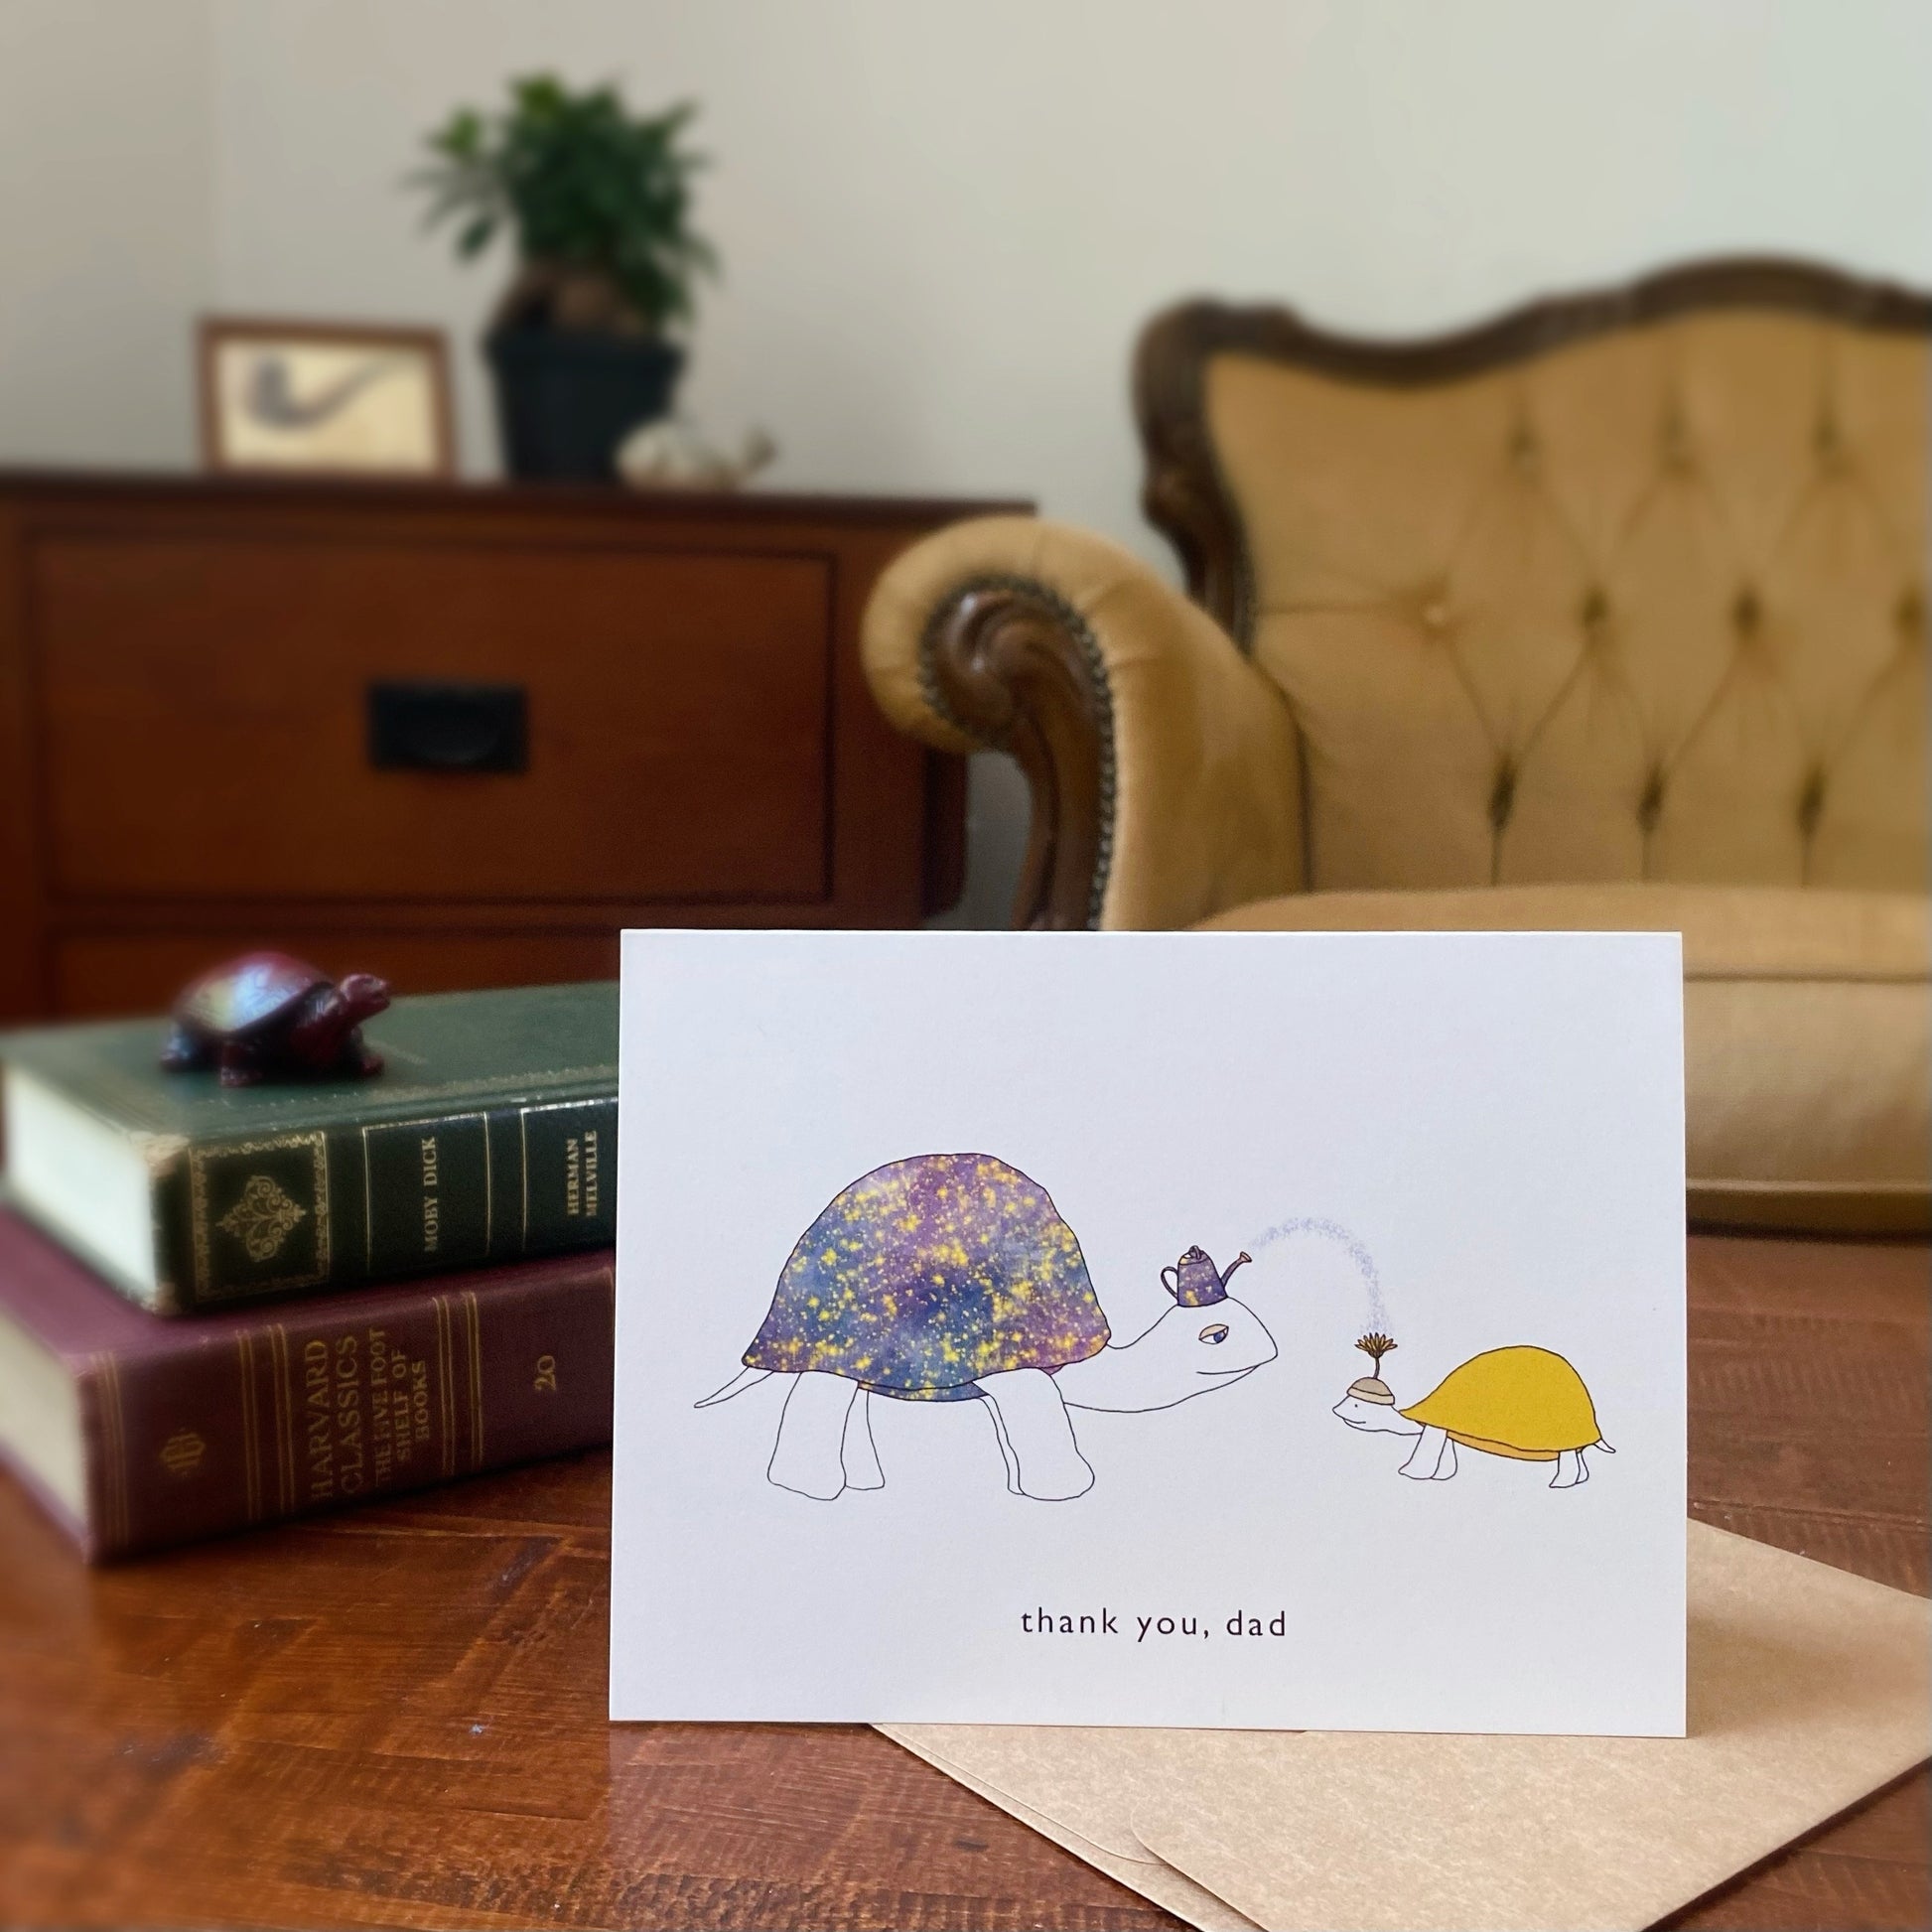 Adorable father’s day card with illustration of two turtles placed in a antique room